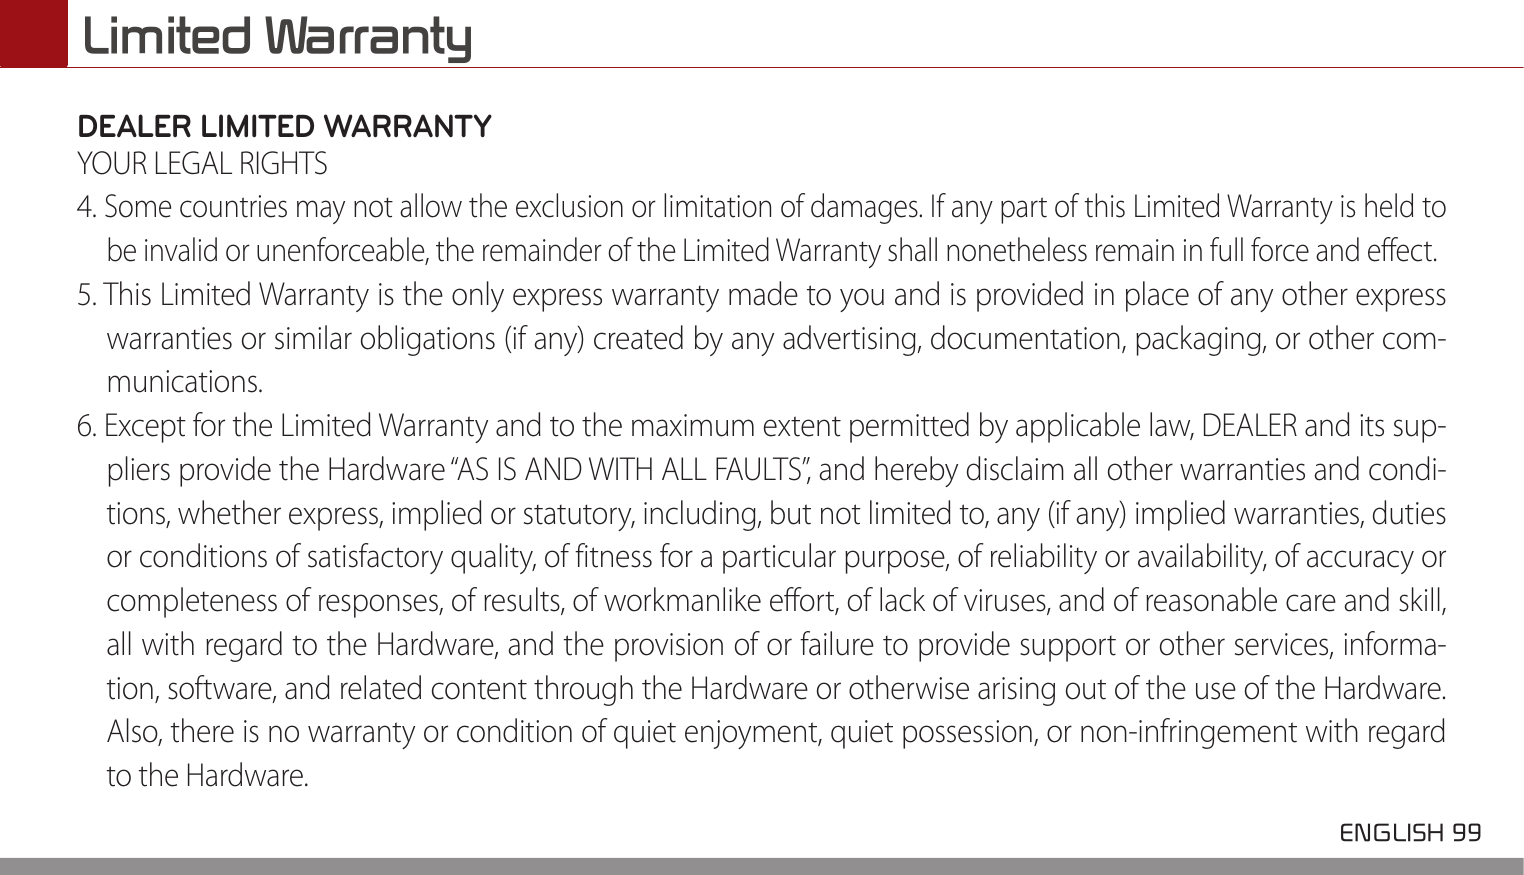  ENGLISH 99 Limited WarrantyDEALER LIMITED WARRANTYYOUR LEGAL RIGHTS4. Some countries may not allow the exclusion or limitation of damages. If any part of this Limited Warranty is held to be invalid or unenforceable, the remainder of the Limited Warranty shall nonetheless remain in full force and effect.5. This Limited Warranty is the only express warranty made to you and is provided in place of any other express warranties or similar obligations (if any) created by any advertising, documentation, packaging, or other com-munications.6. Except for the Limited Warranty and to the maximum extent permitted by applicable law, DEALER and its sup-pliers provide the Hardware “AS IS AND WITH ALL FAULTS”, and hereby disclaim all other warranties and condi-tions, whether express, implied or statutory, including, but not limited to, any (if any) implied warranties, duties or conditions of satisfactory quality, of fitness for a particular purpose, of reliability or availability, of accuracy or completeness of responses, of results, of workmanlike effort, of lack of viruses, and of reasonable care and skill, all with regard to the Hardware, and the provision of or failure to provide support or other services, informa-tion, software, and related content through the Hardware or otherwise arising out of the use of the Hardware. Also, there is no warranty or condition of quiet enjoyment, quiet possession, or non-infringement with regard to the Hardware.